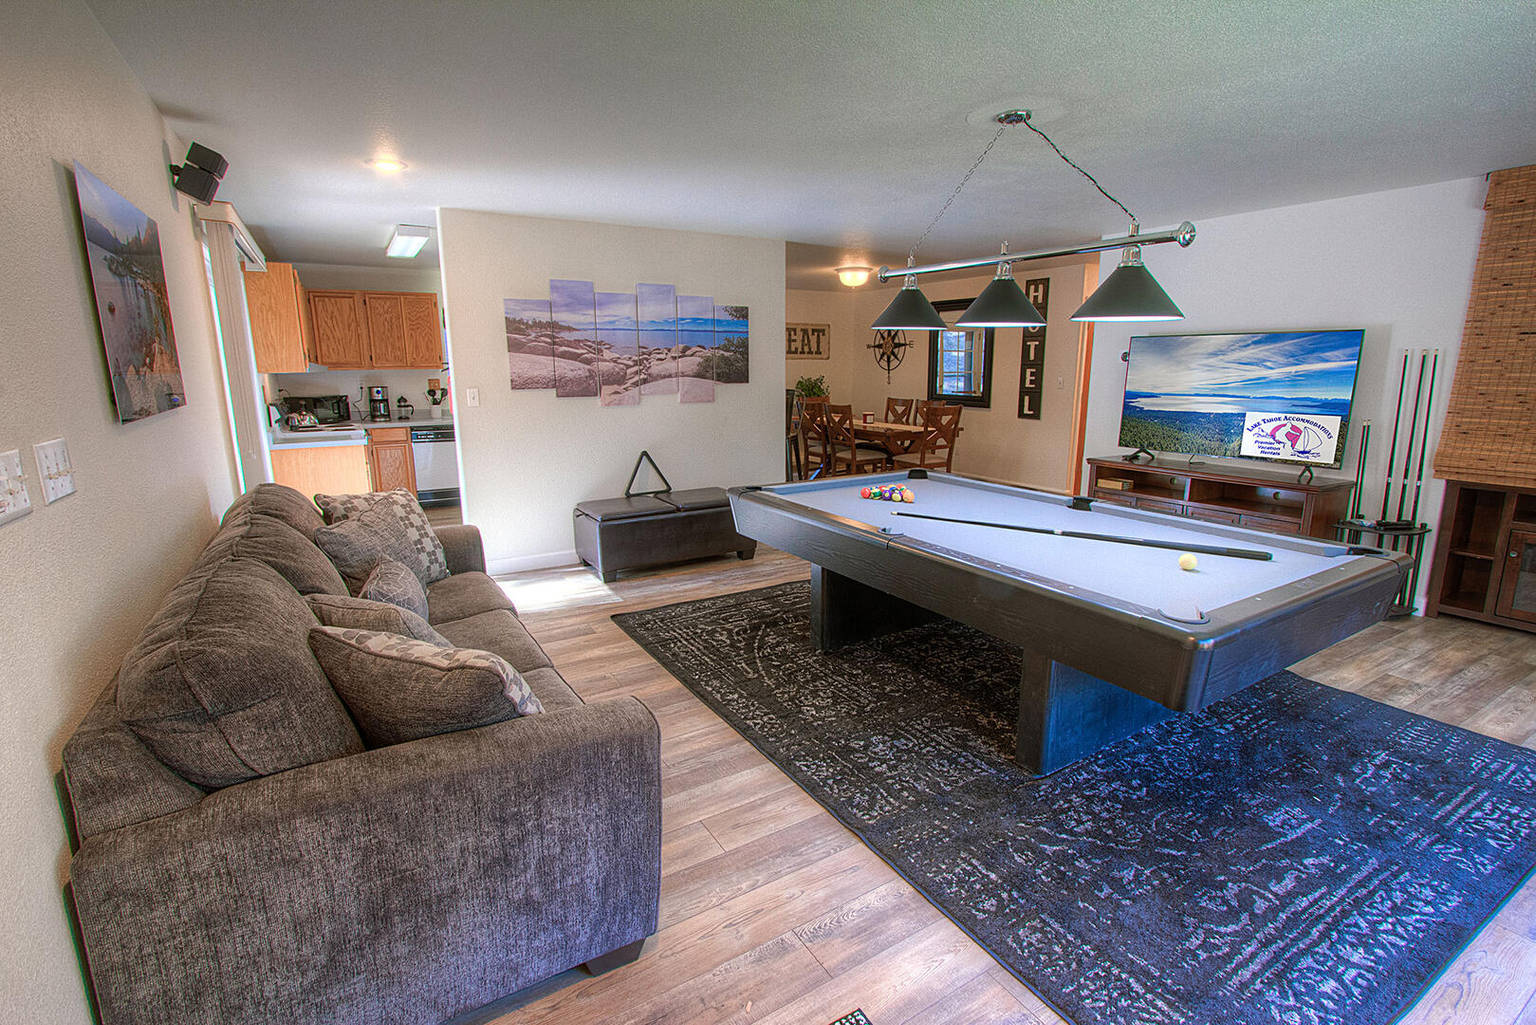 Zephyr Cove Vacation Rental